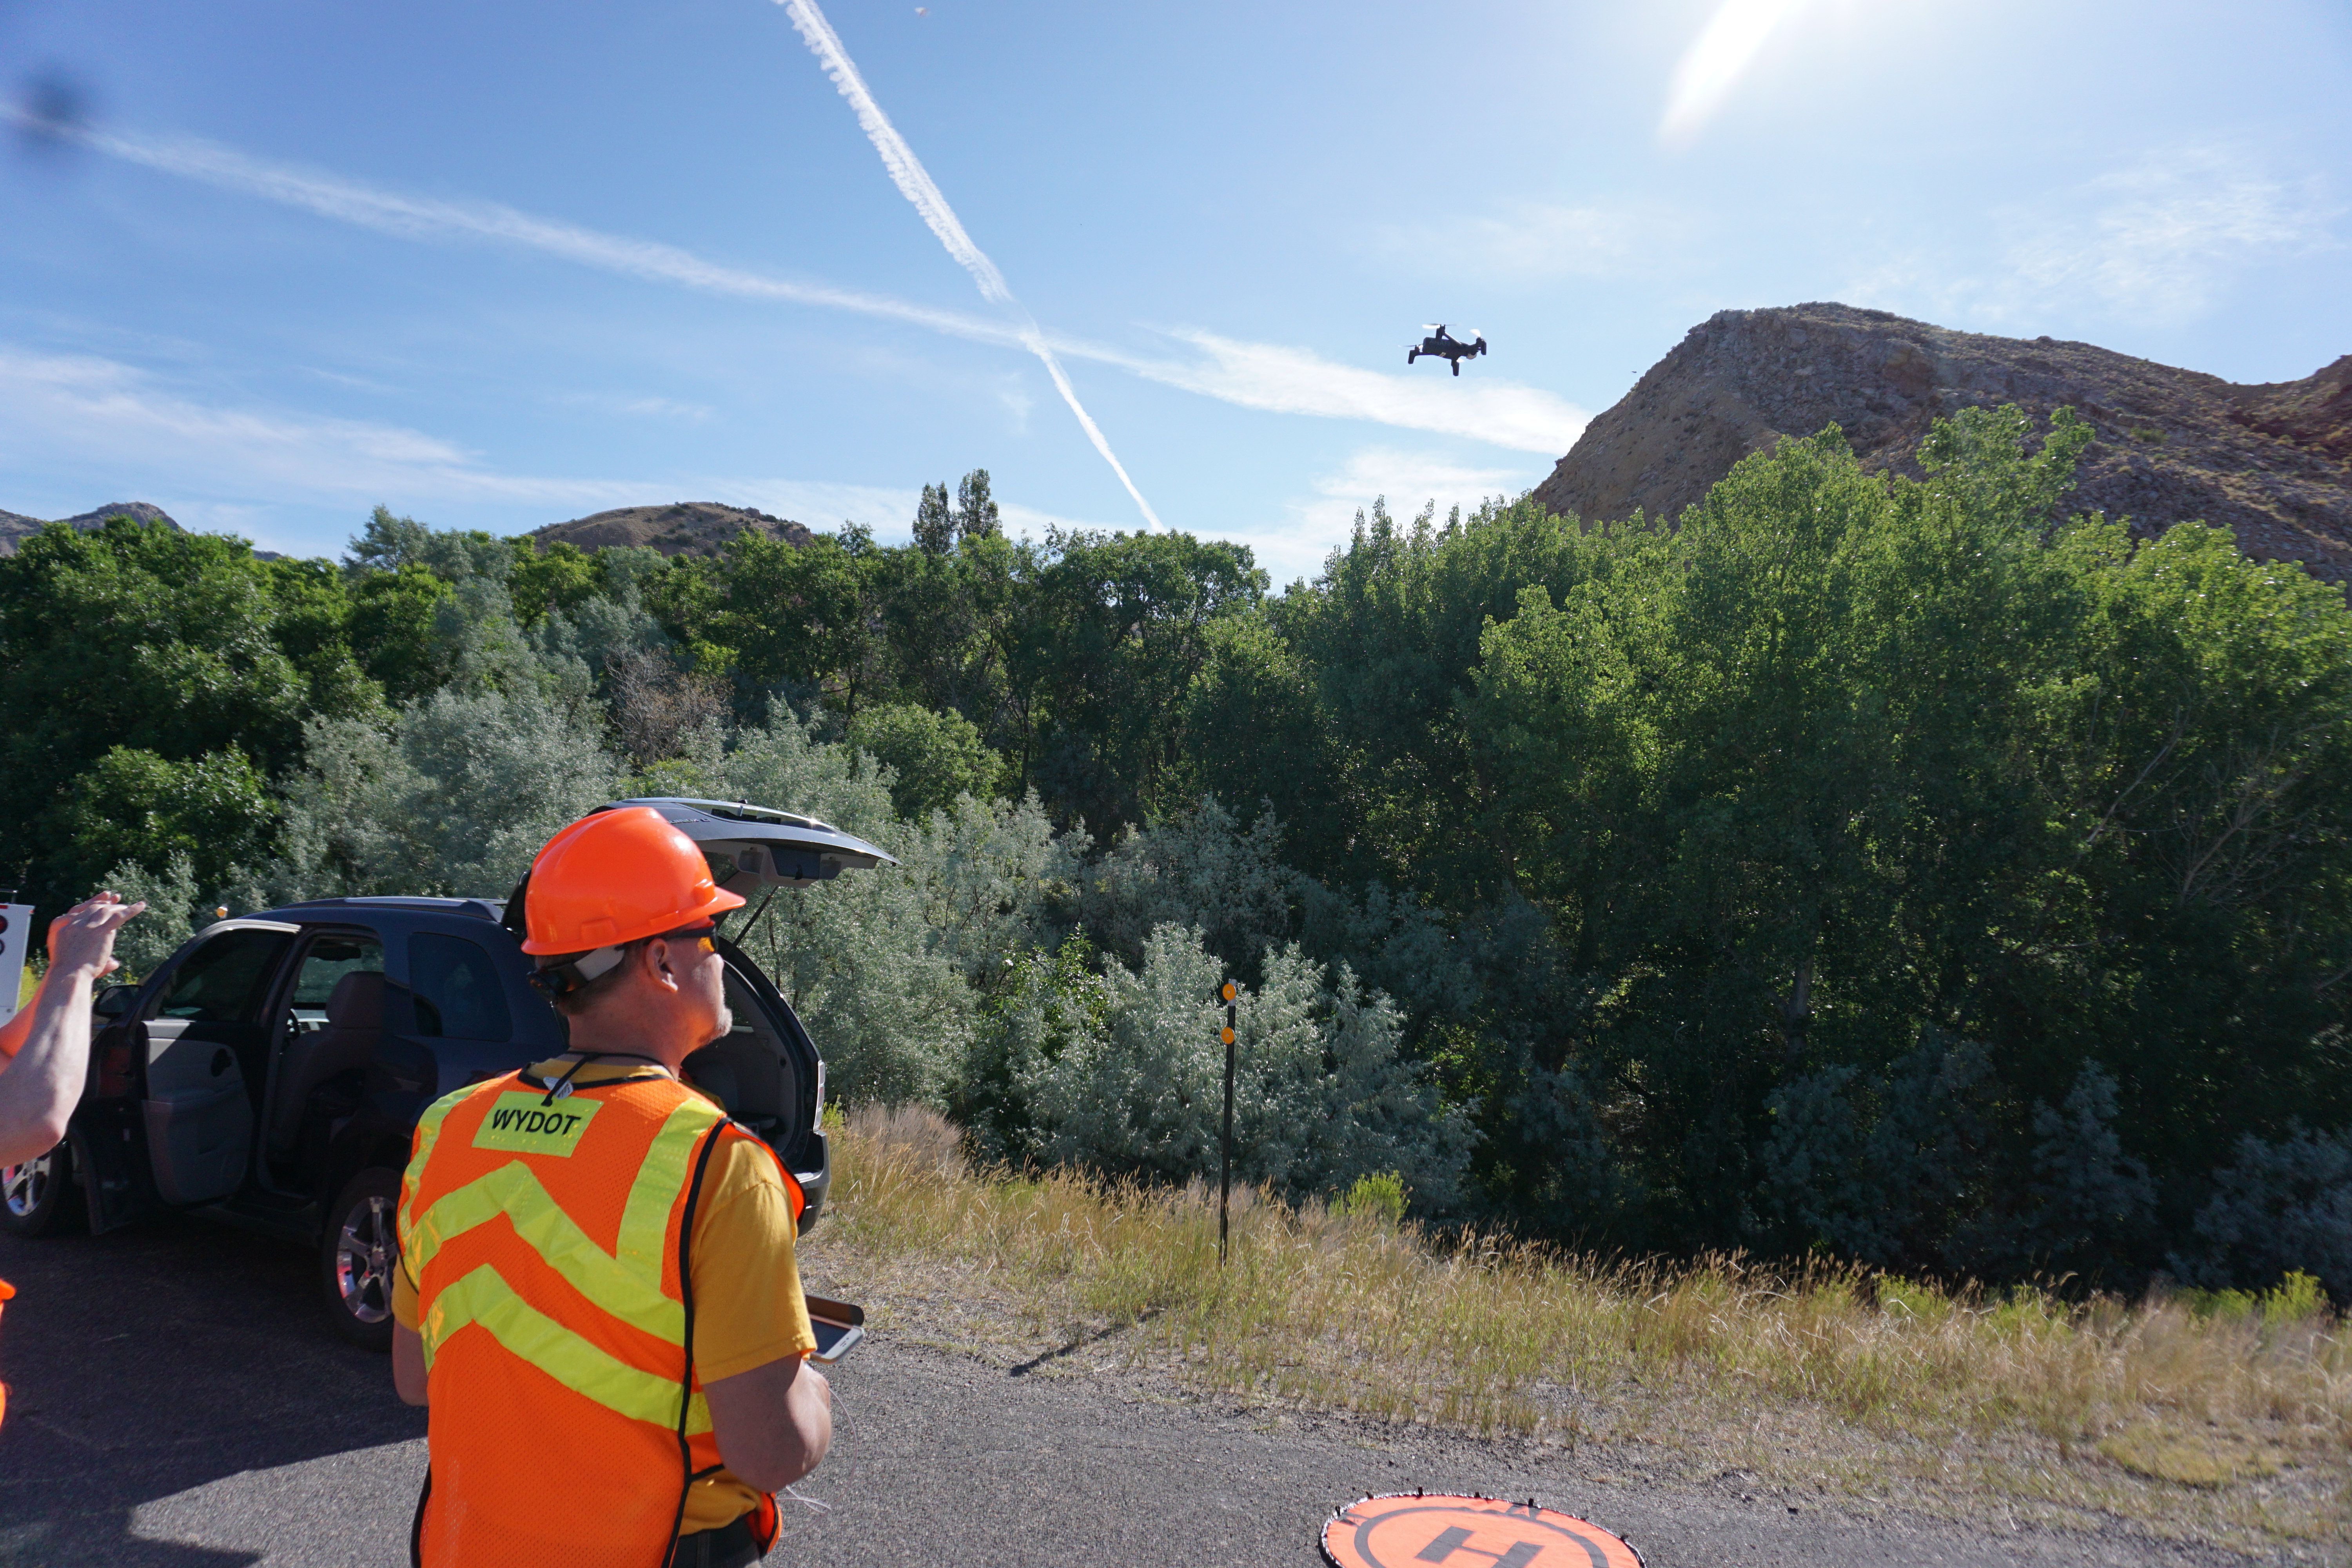 Road worker operating a Drone